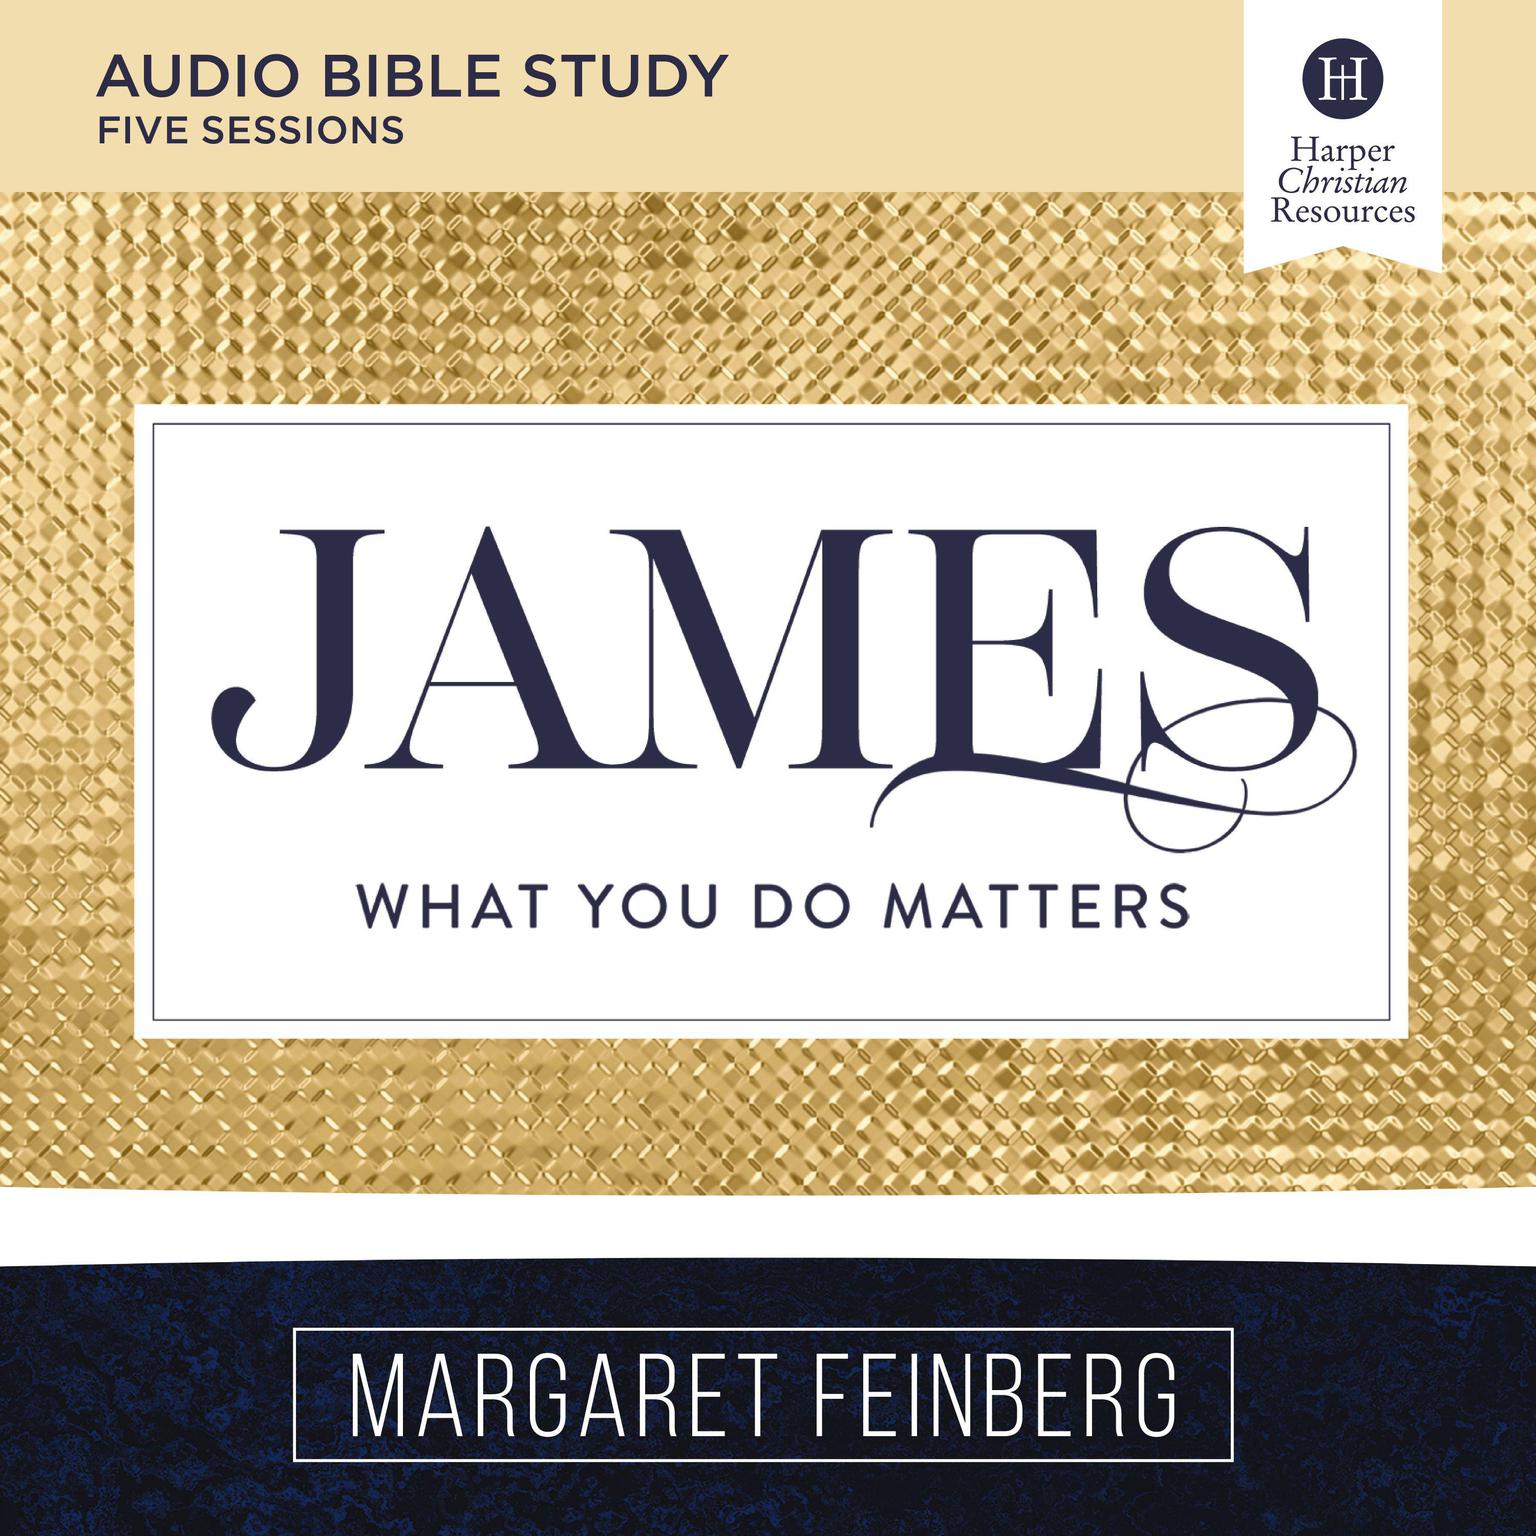 James: Audio Bible Studies: What You Do Matters Audiobook, by Margaret Feinberg